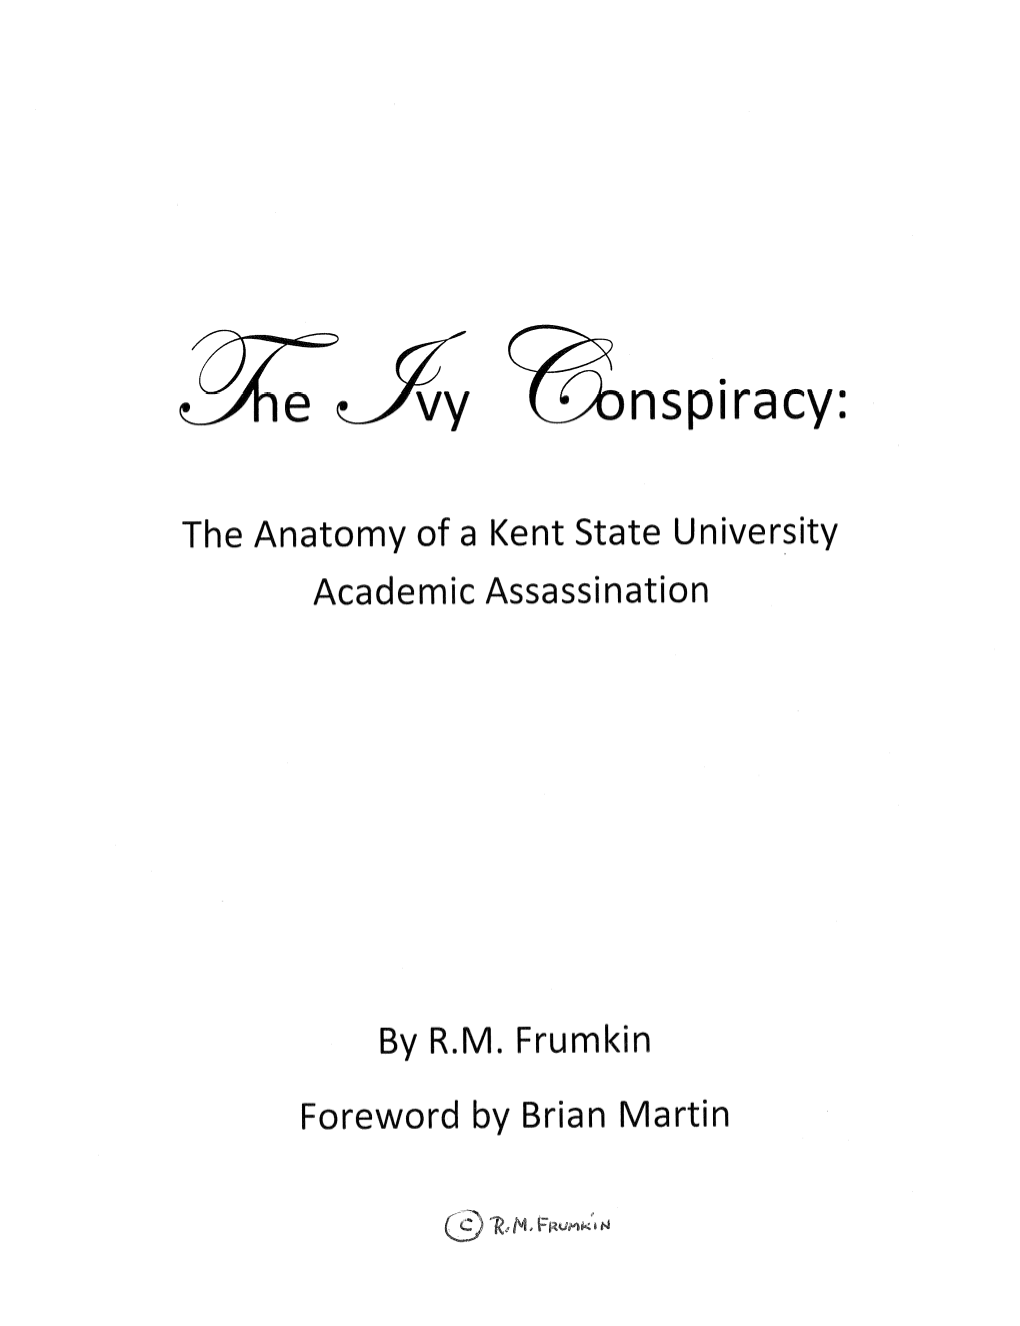 Title Page, Cover, Contents and Foreword by Brian